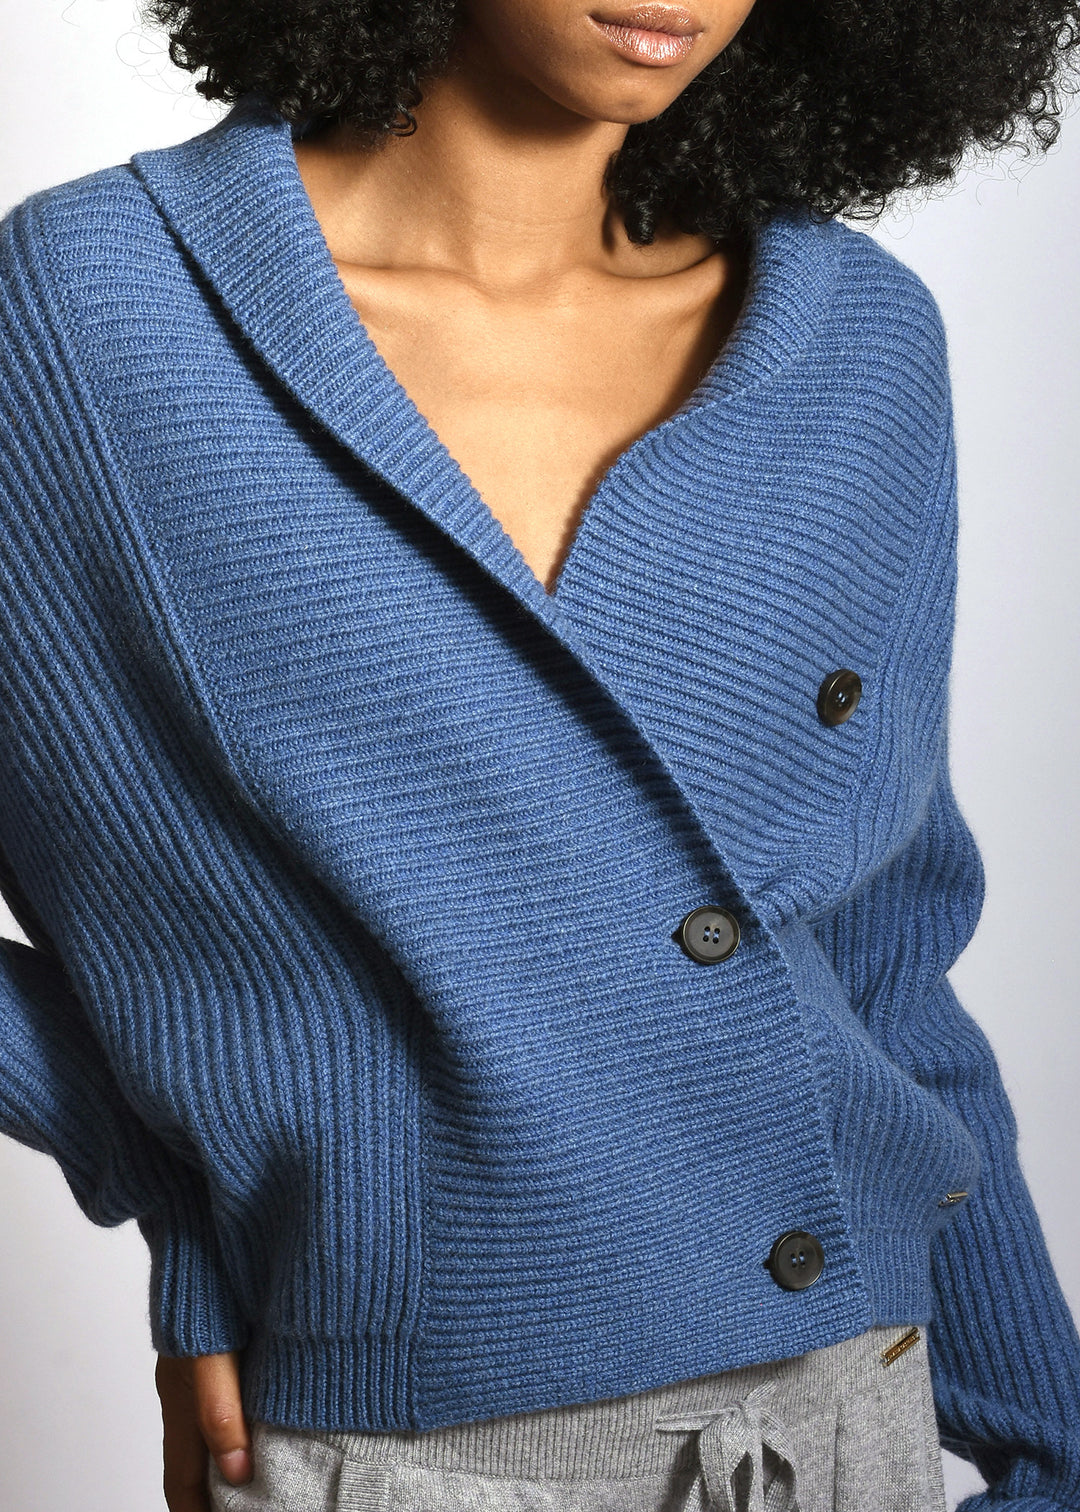 Cashmere Cardigans for Women